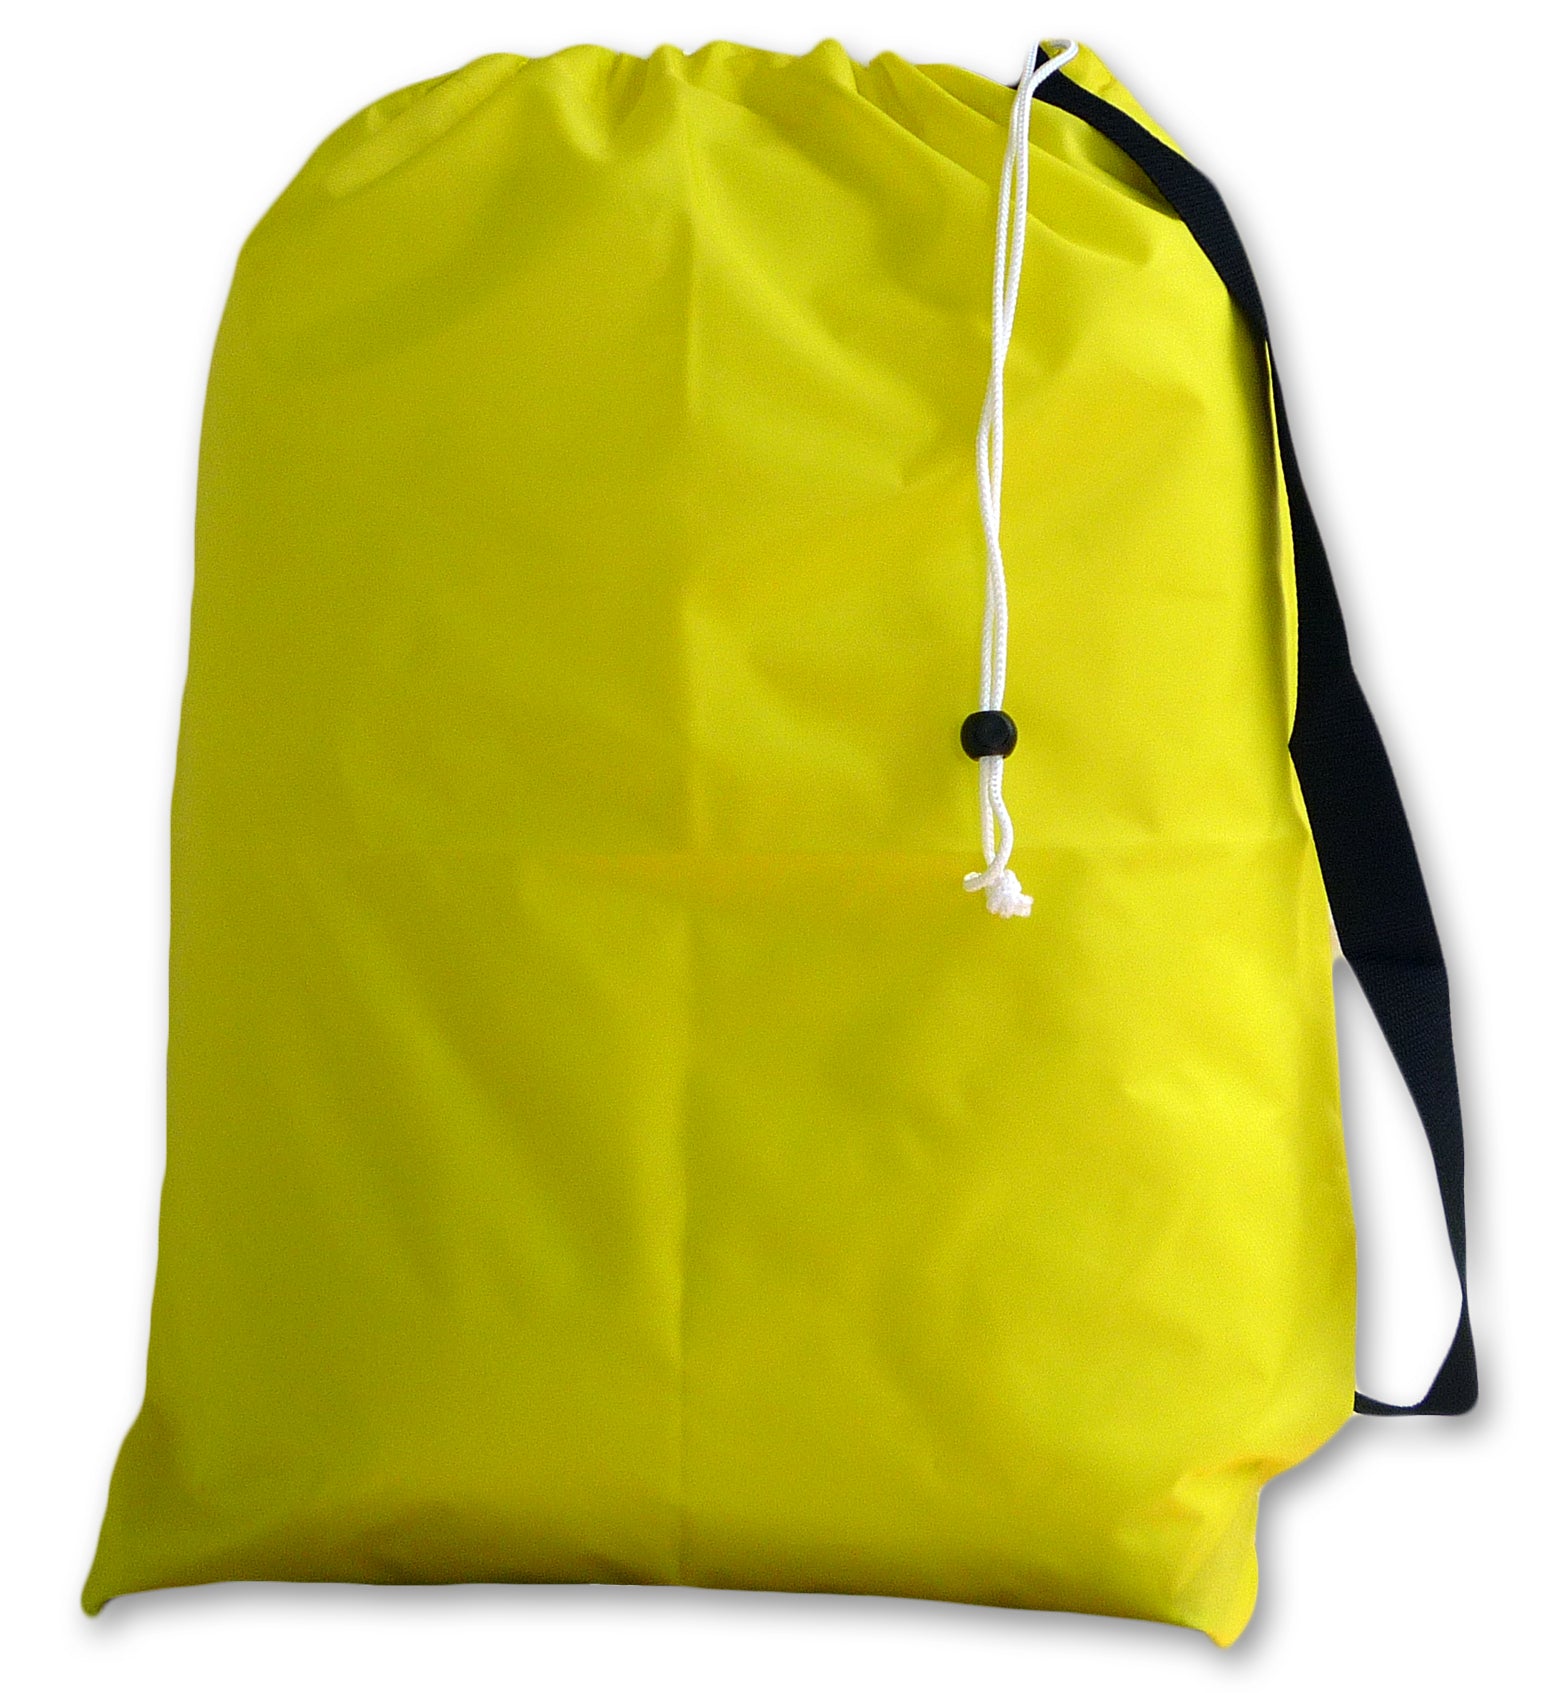 Small Laundry Bag with Strap, Yellow